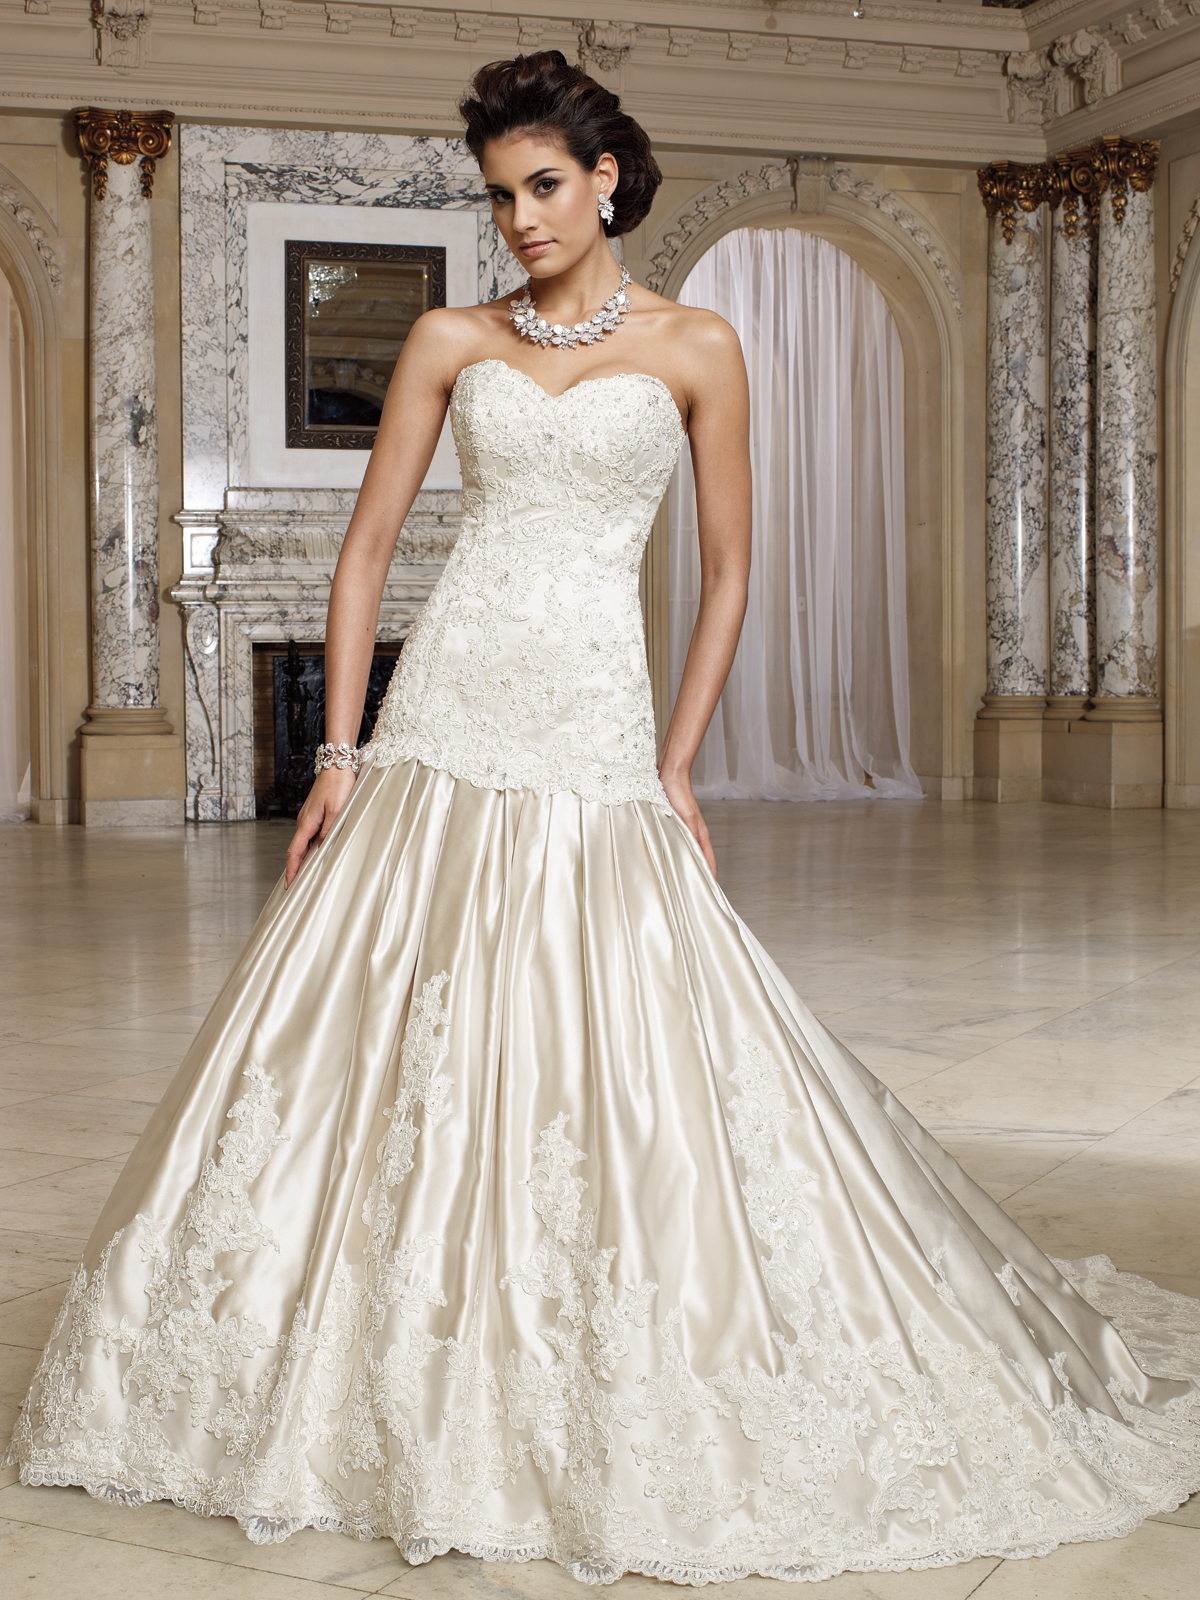 IN LOVE WITH BEAUTY: Wedding Dresses by David Tutera